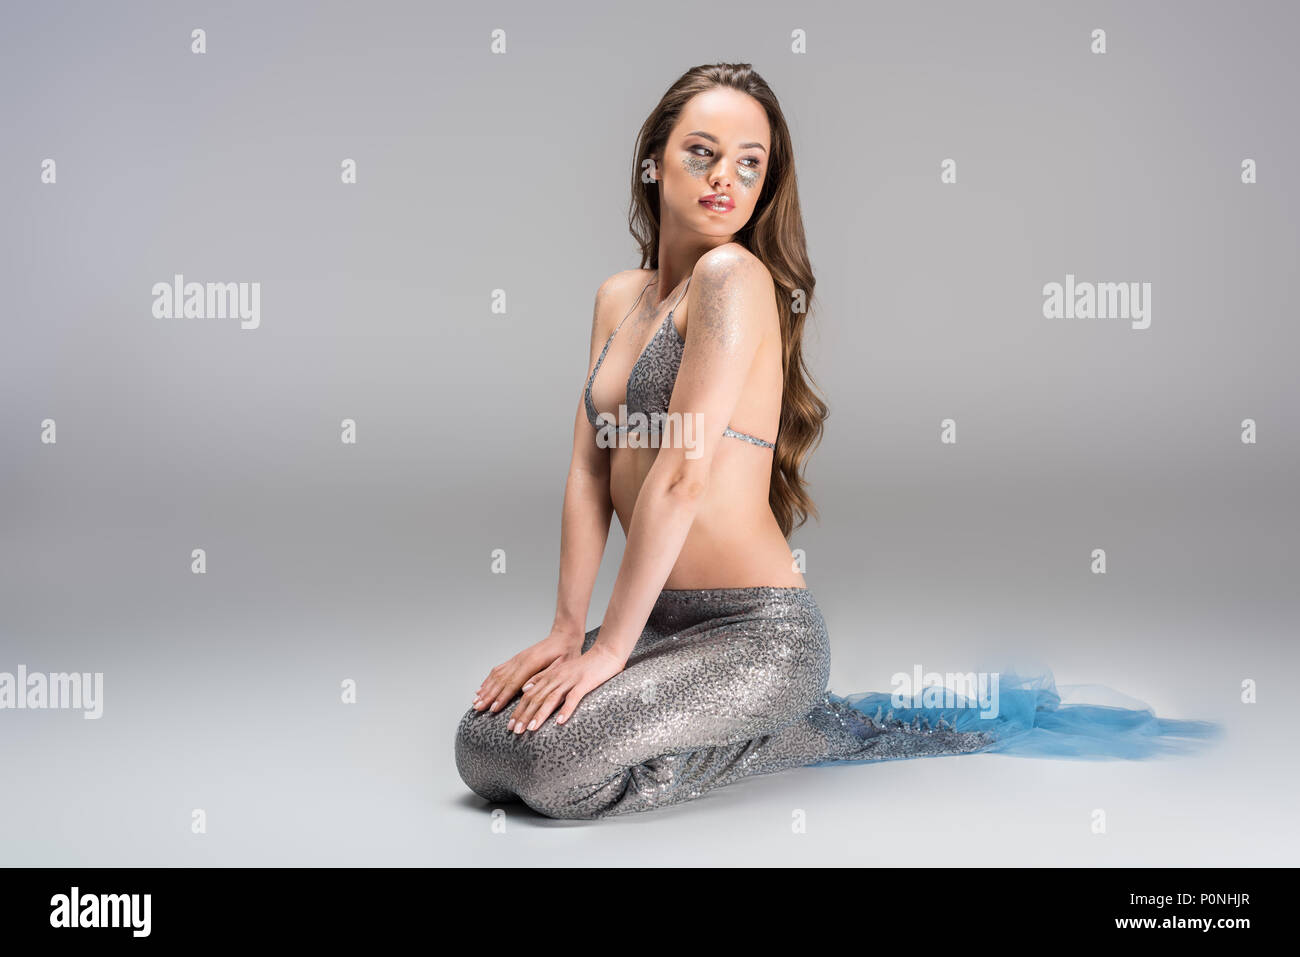 attractive woman with mermaid tail and silver top sitting on floor Stock Photo